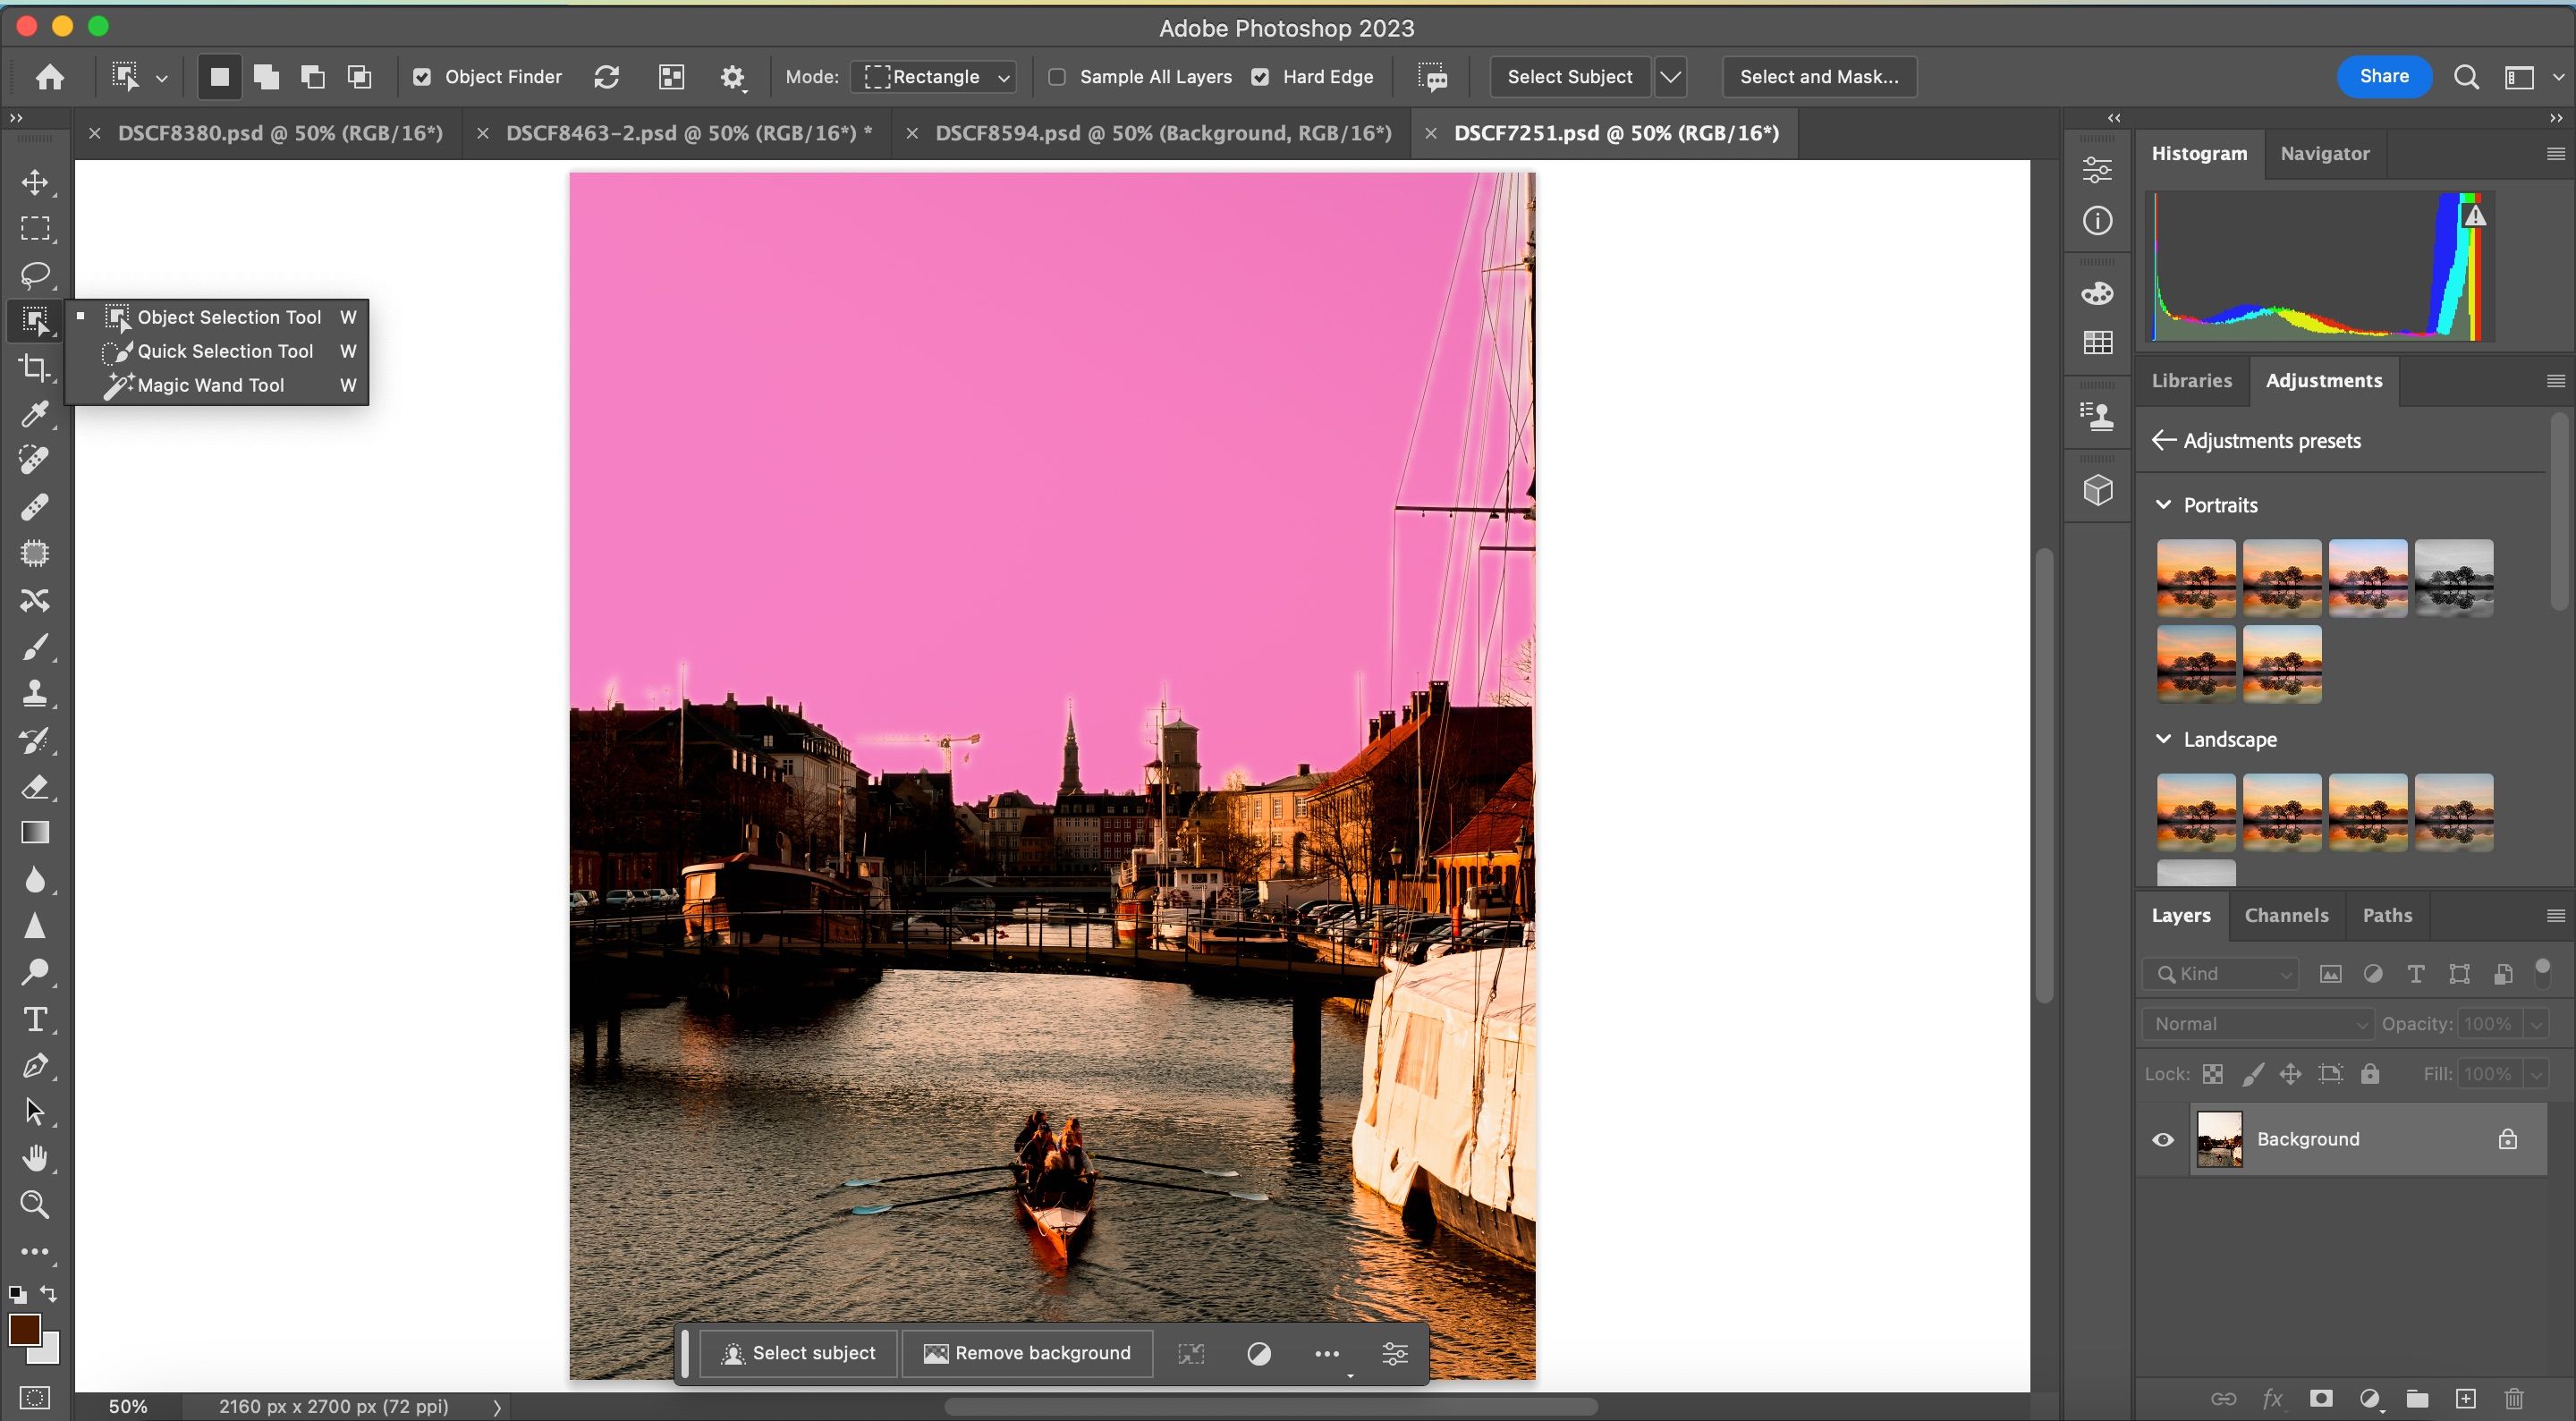 The Quick Selection Tool in Photoshop